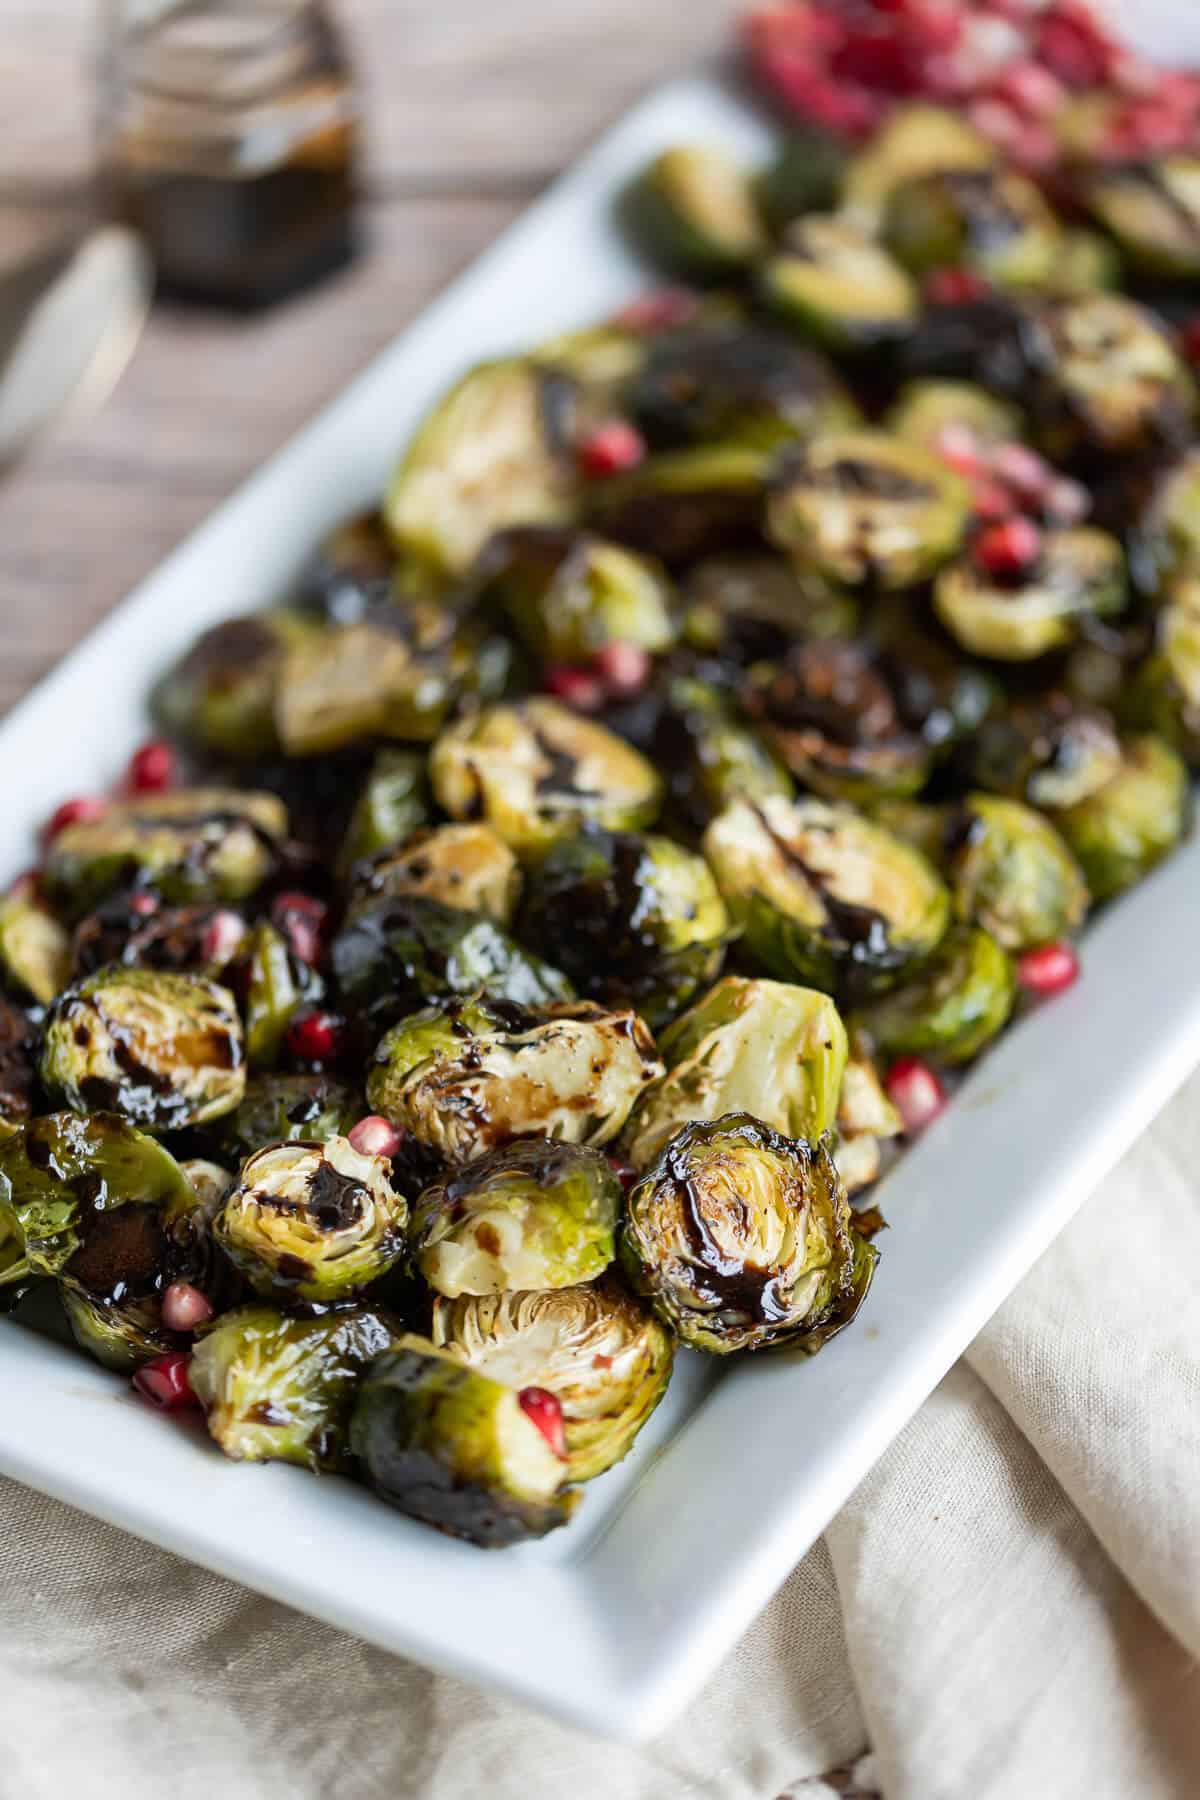 Platter of roasted brussels sprouts drizzled with balsamic reduction.